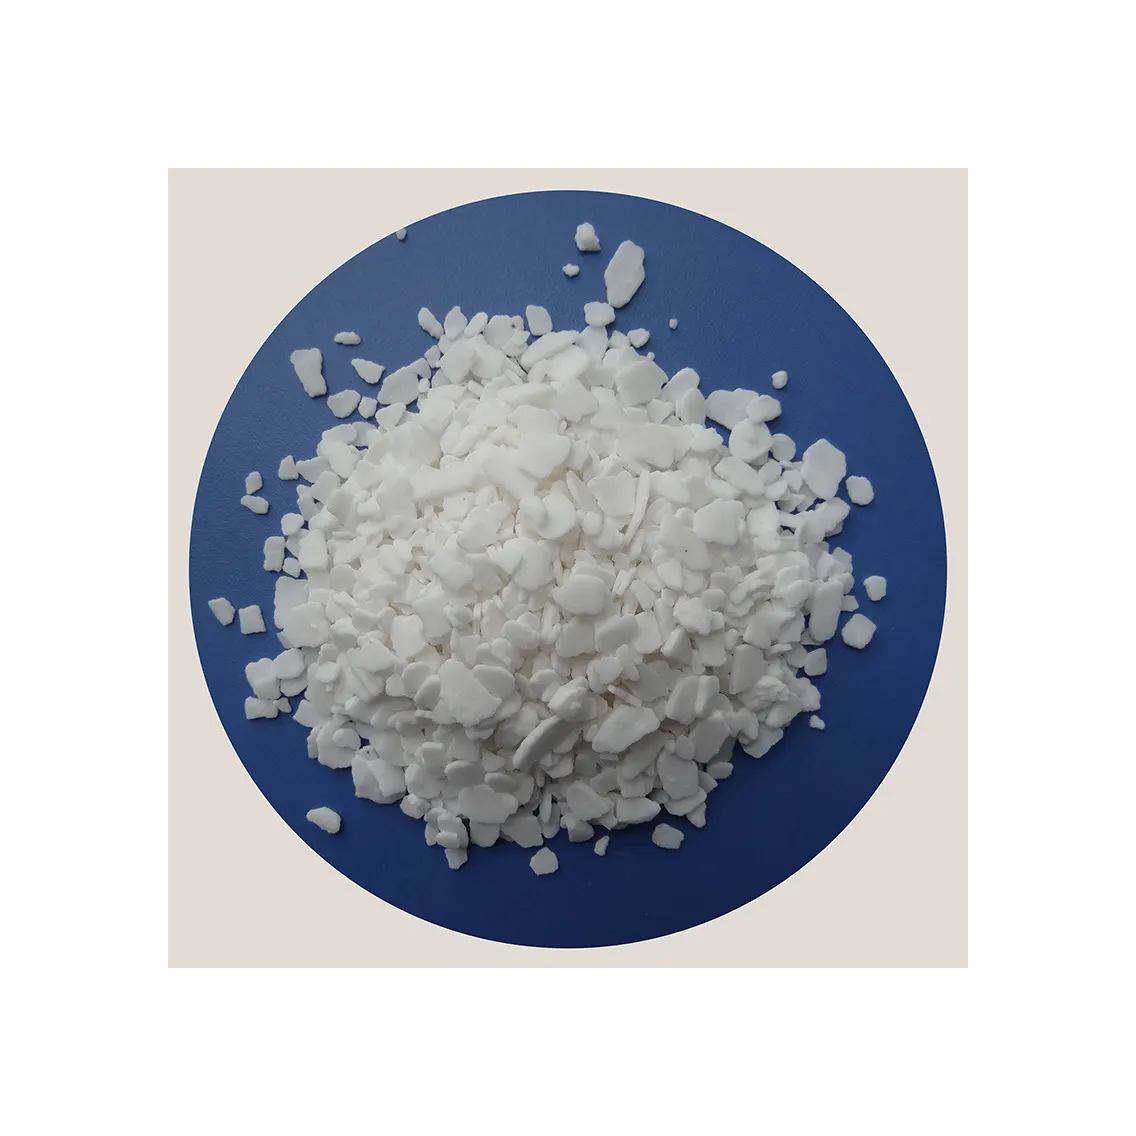 Bulk supply CaCl2 Calcium Chloride 74% to 77% in flakes industrial grade